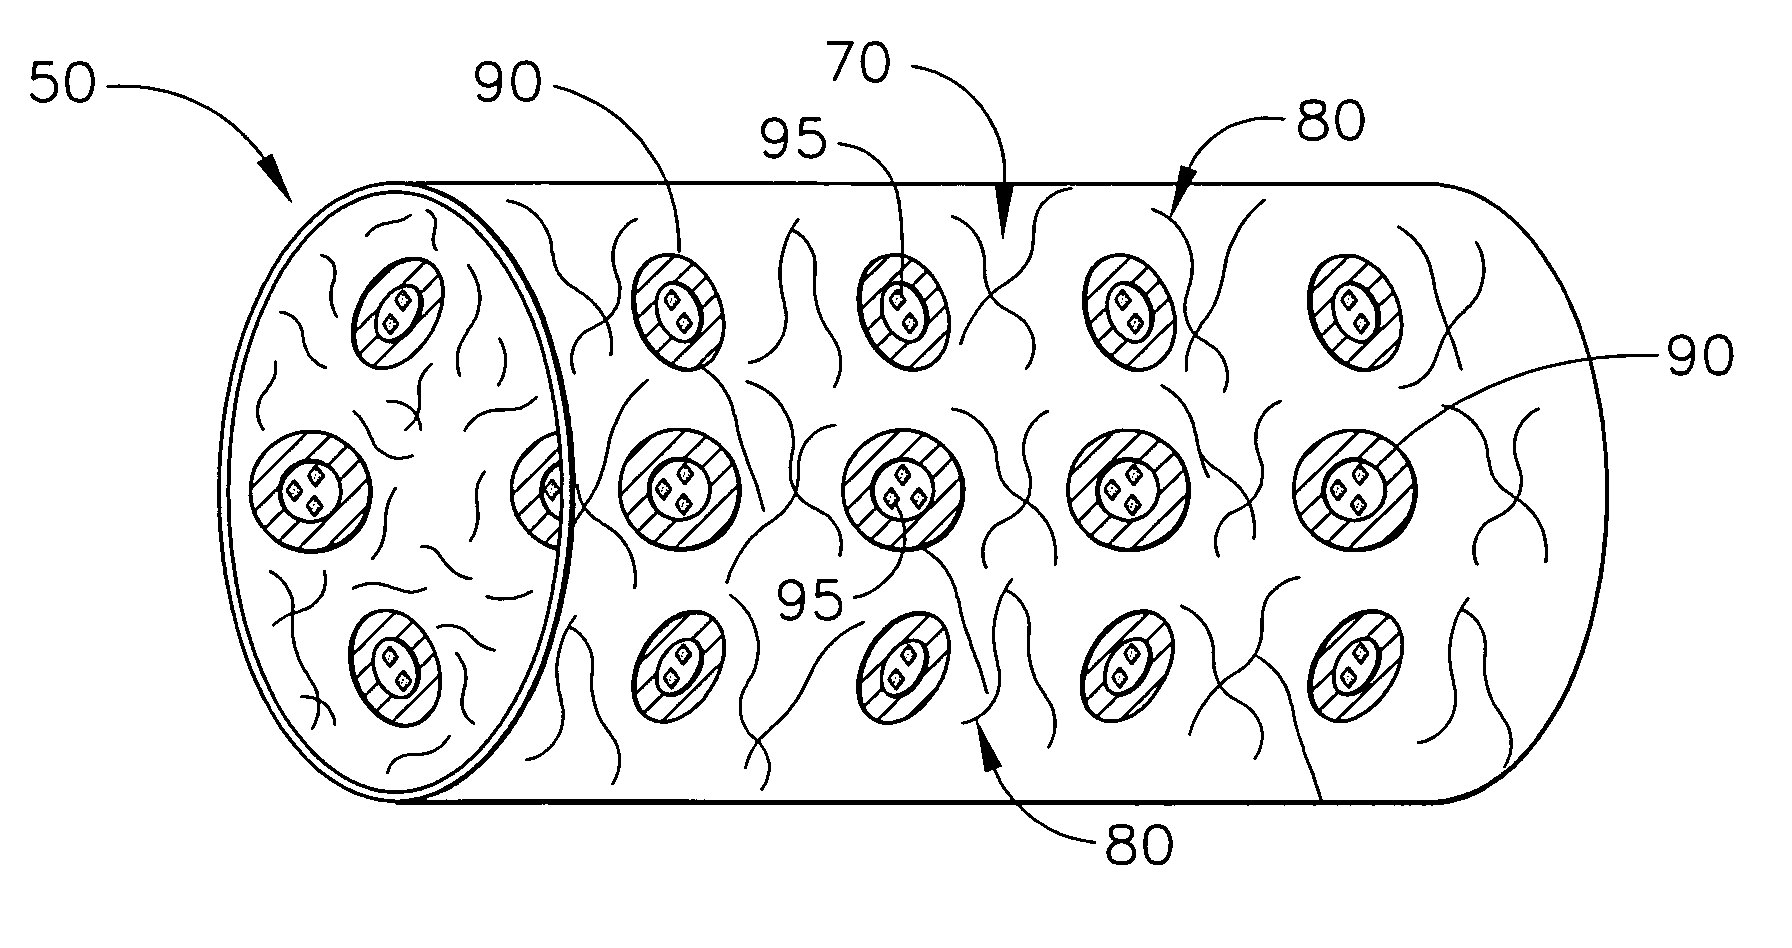 Biodegradable vascular device with buffering agent